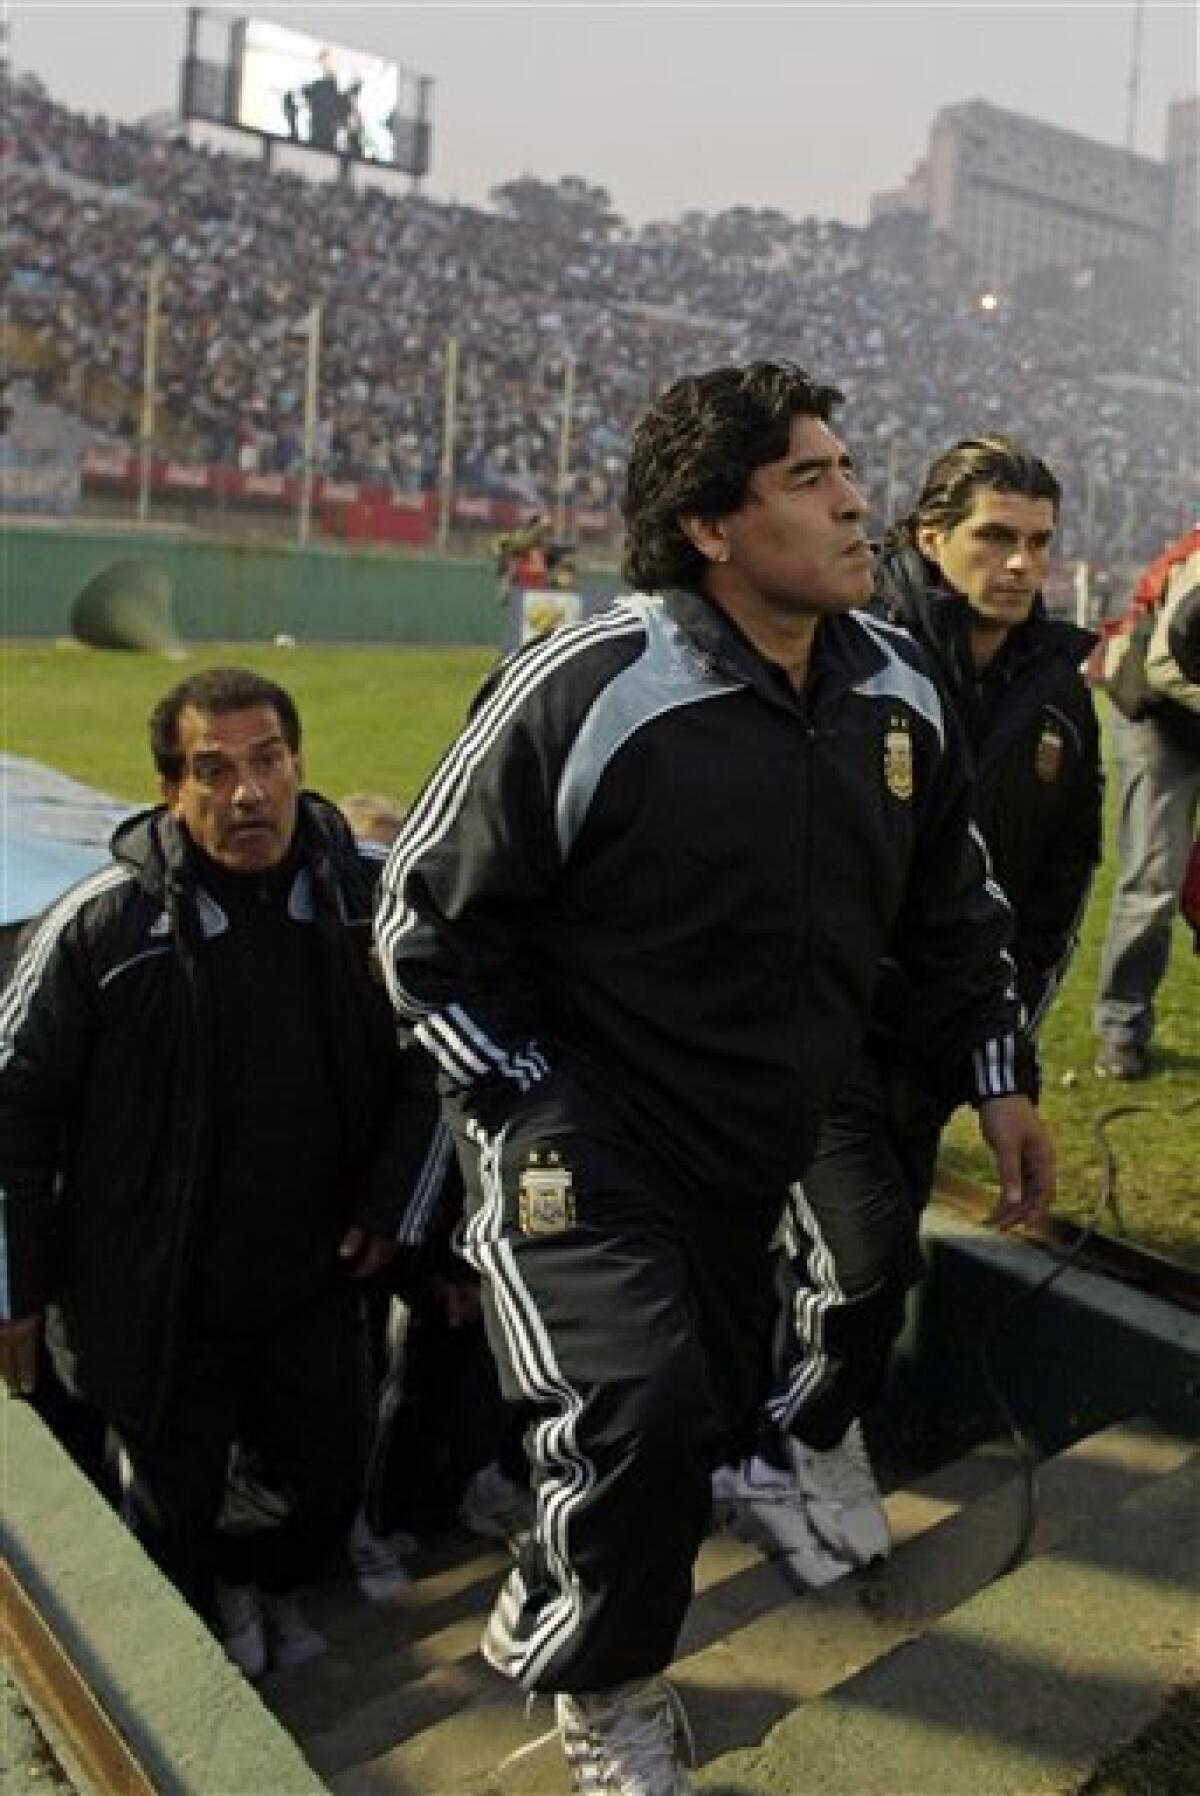 Argentina's coach Diego Maradona enters the field for a 2010 World Cup qualifying soccer match against Uruguay in Montevideo, Wednesday, Oct. 14, 2009. Argentina won 1-0. (AP Photo/Natacha Pisarenko)